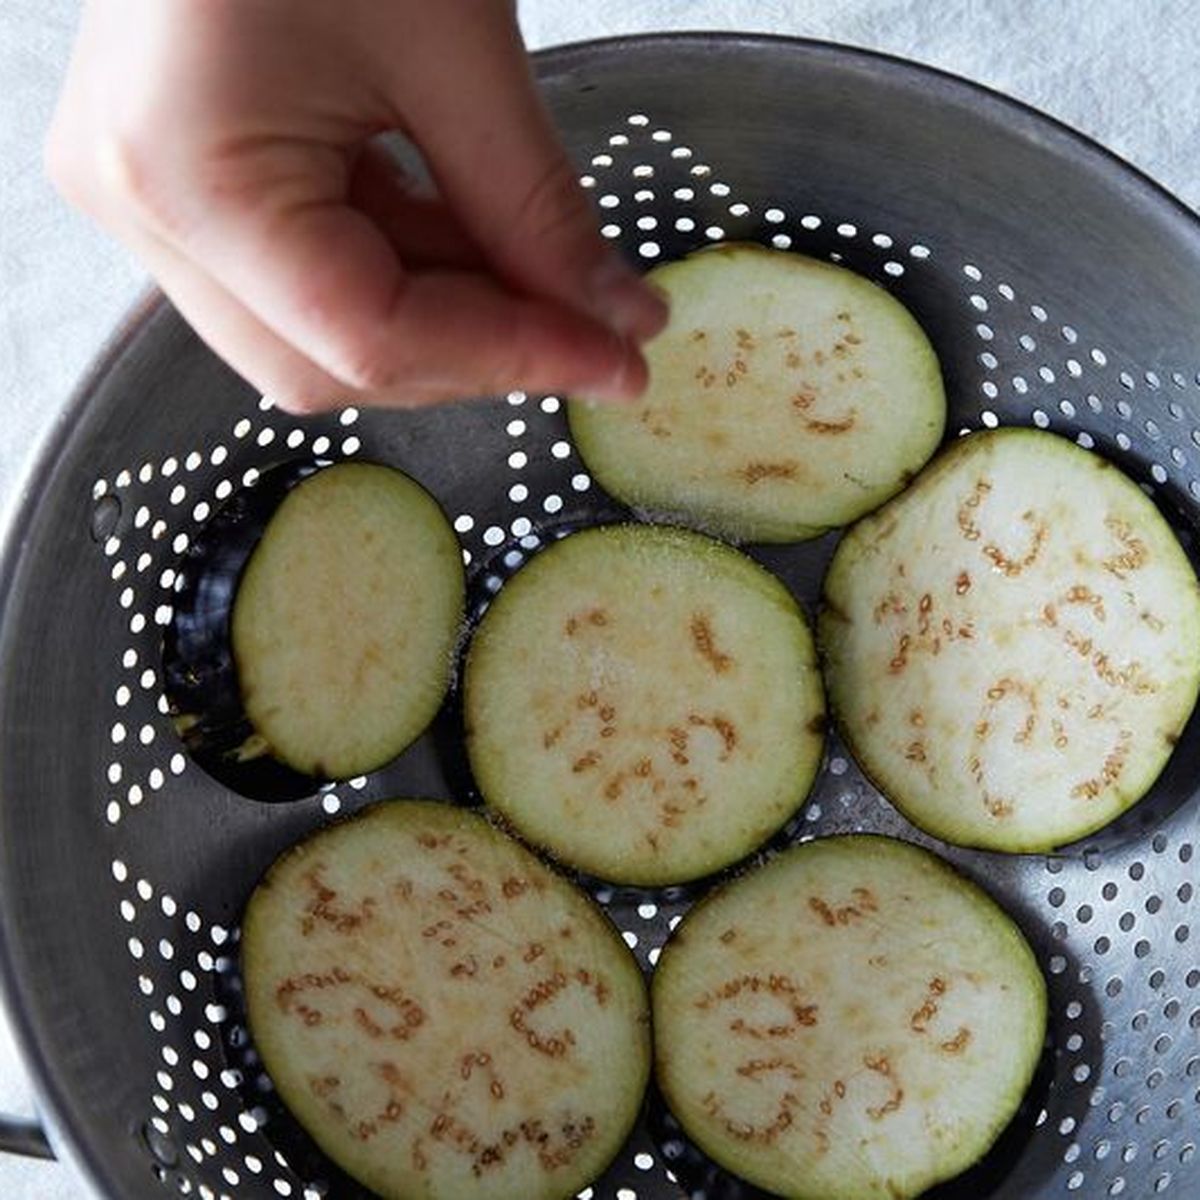 Is It Important To Salt Eggplant Before Cooking It